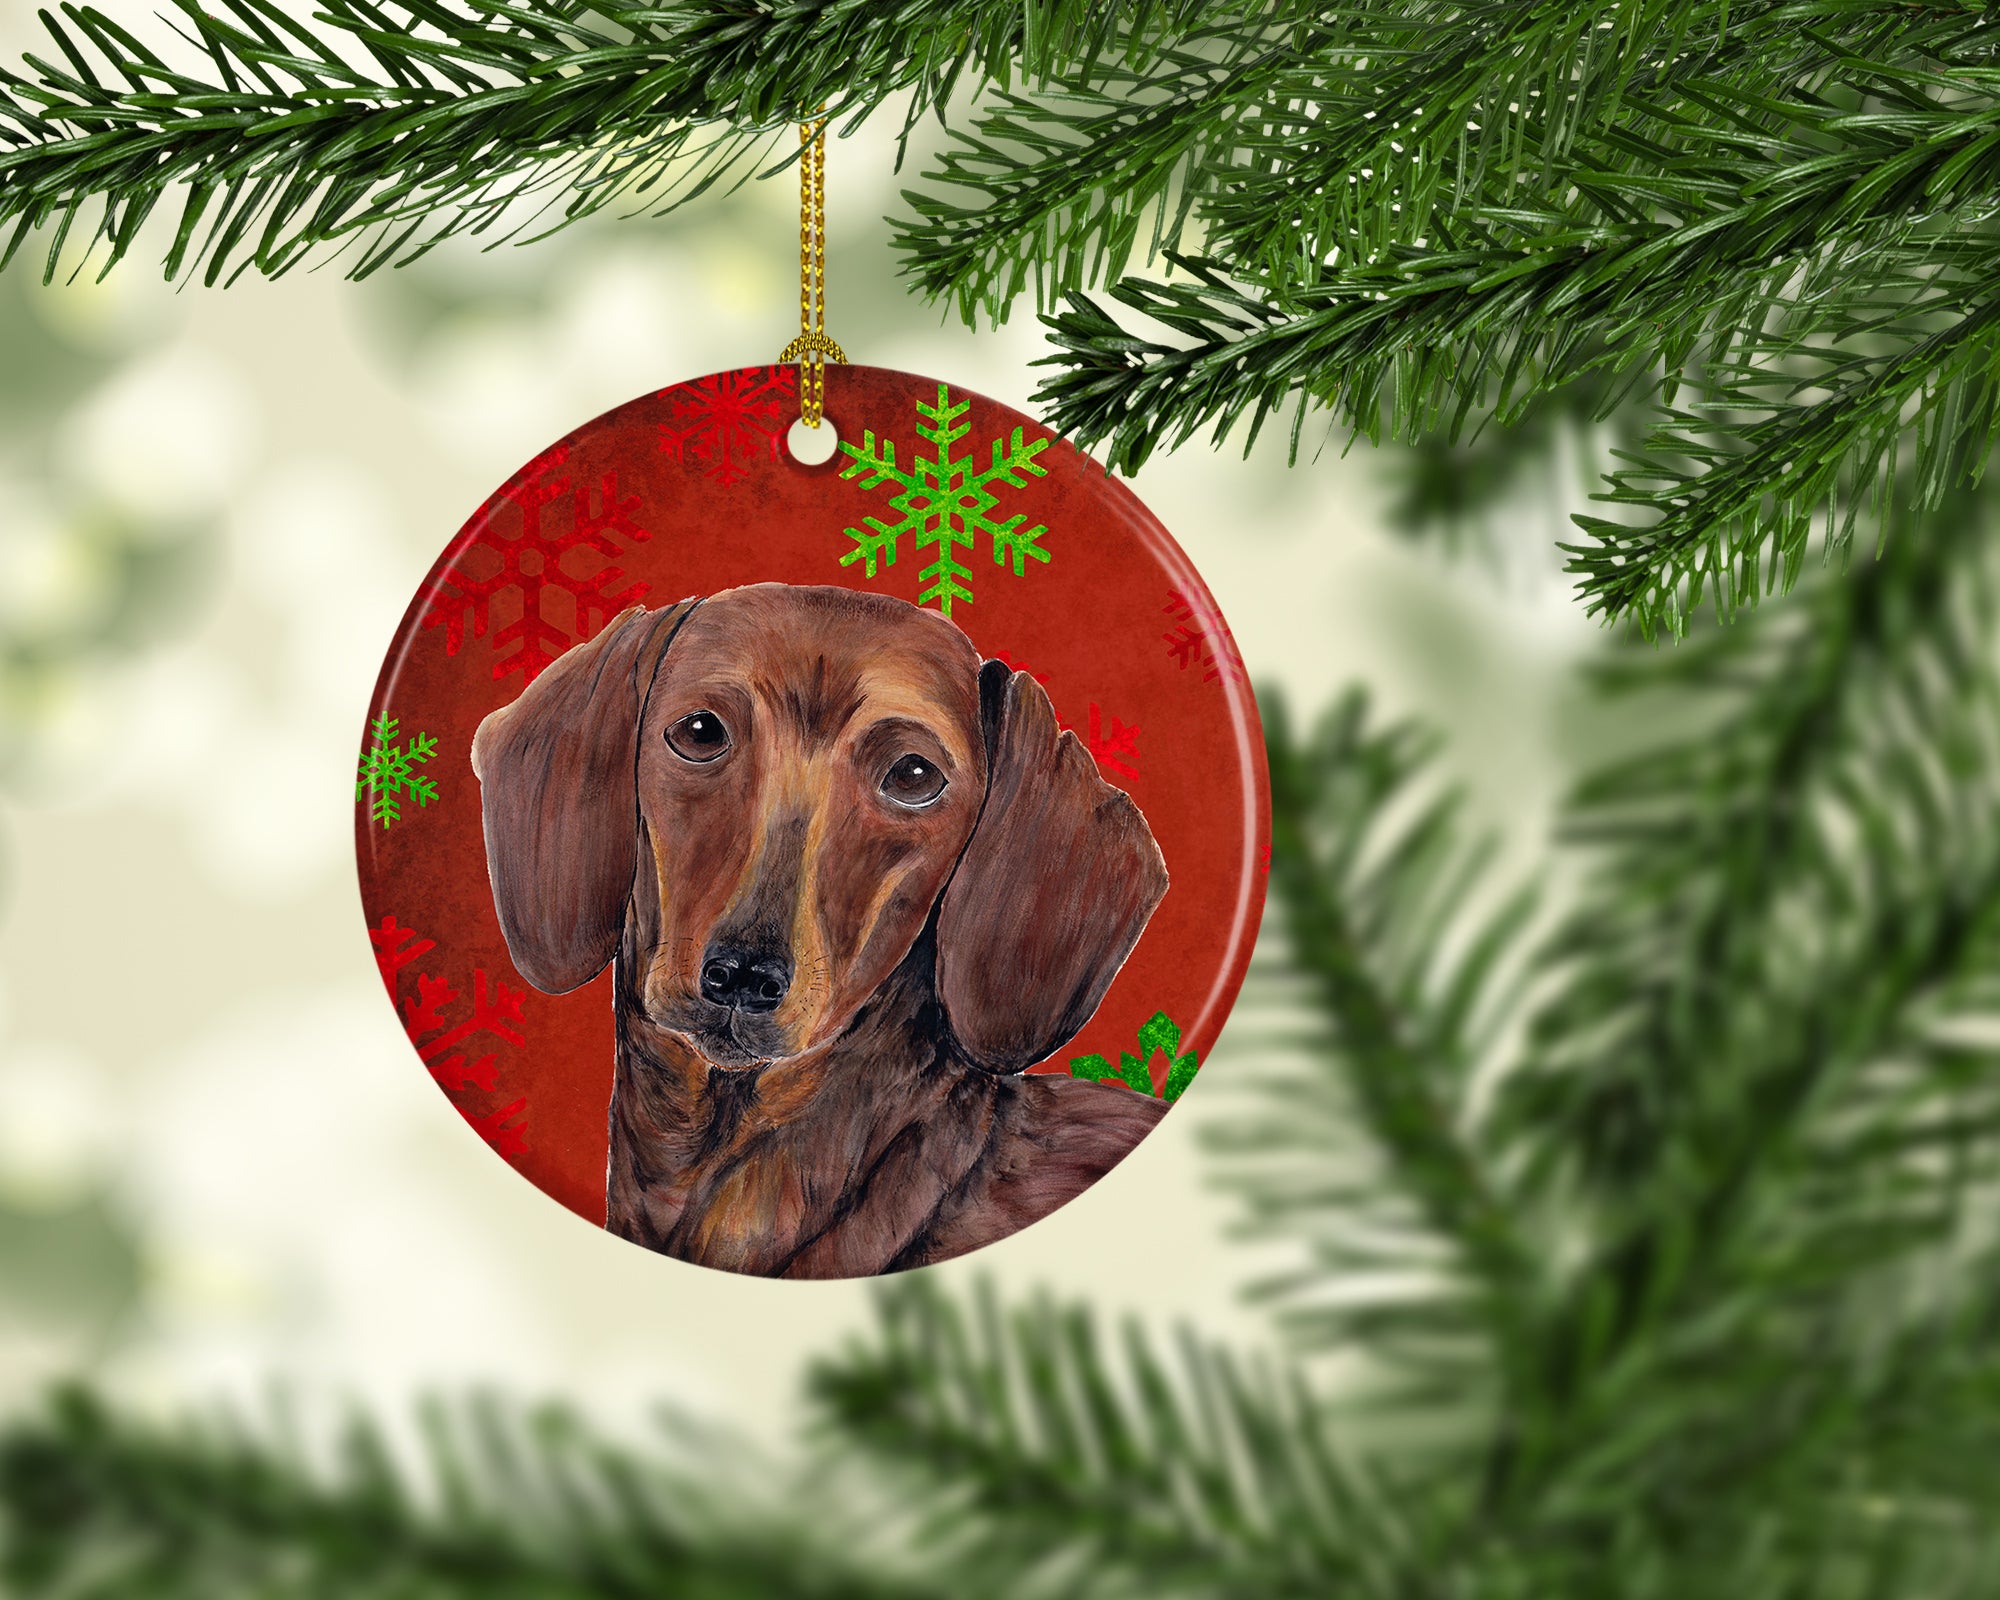 Dachshund Red Snowflakes Holiday Christmas Ceramic Ornament SC9408 - the-store.com